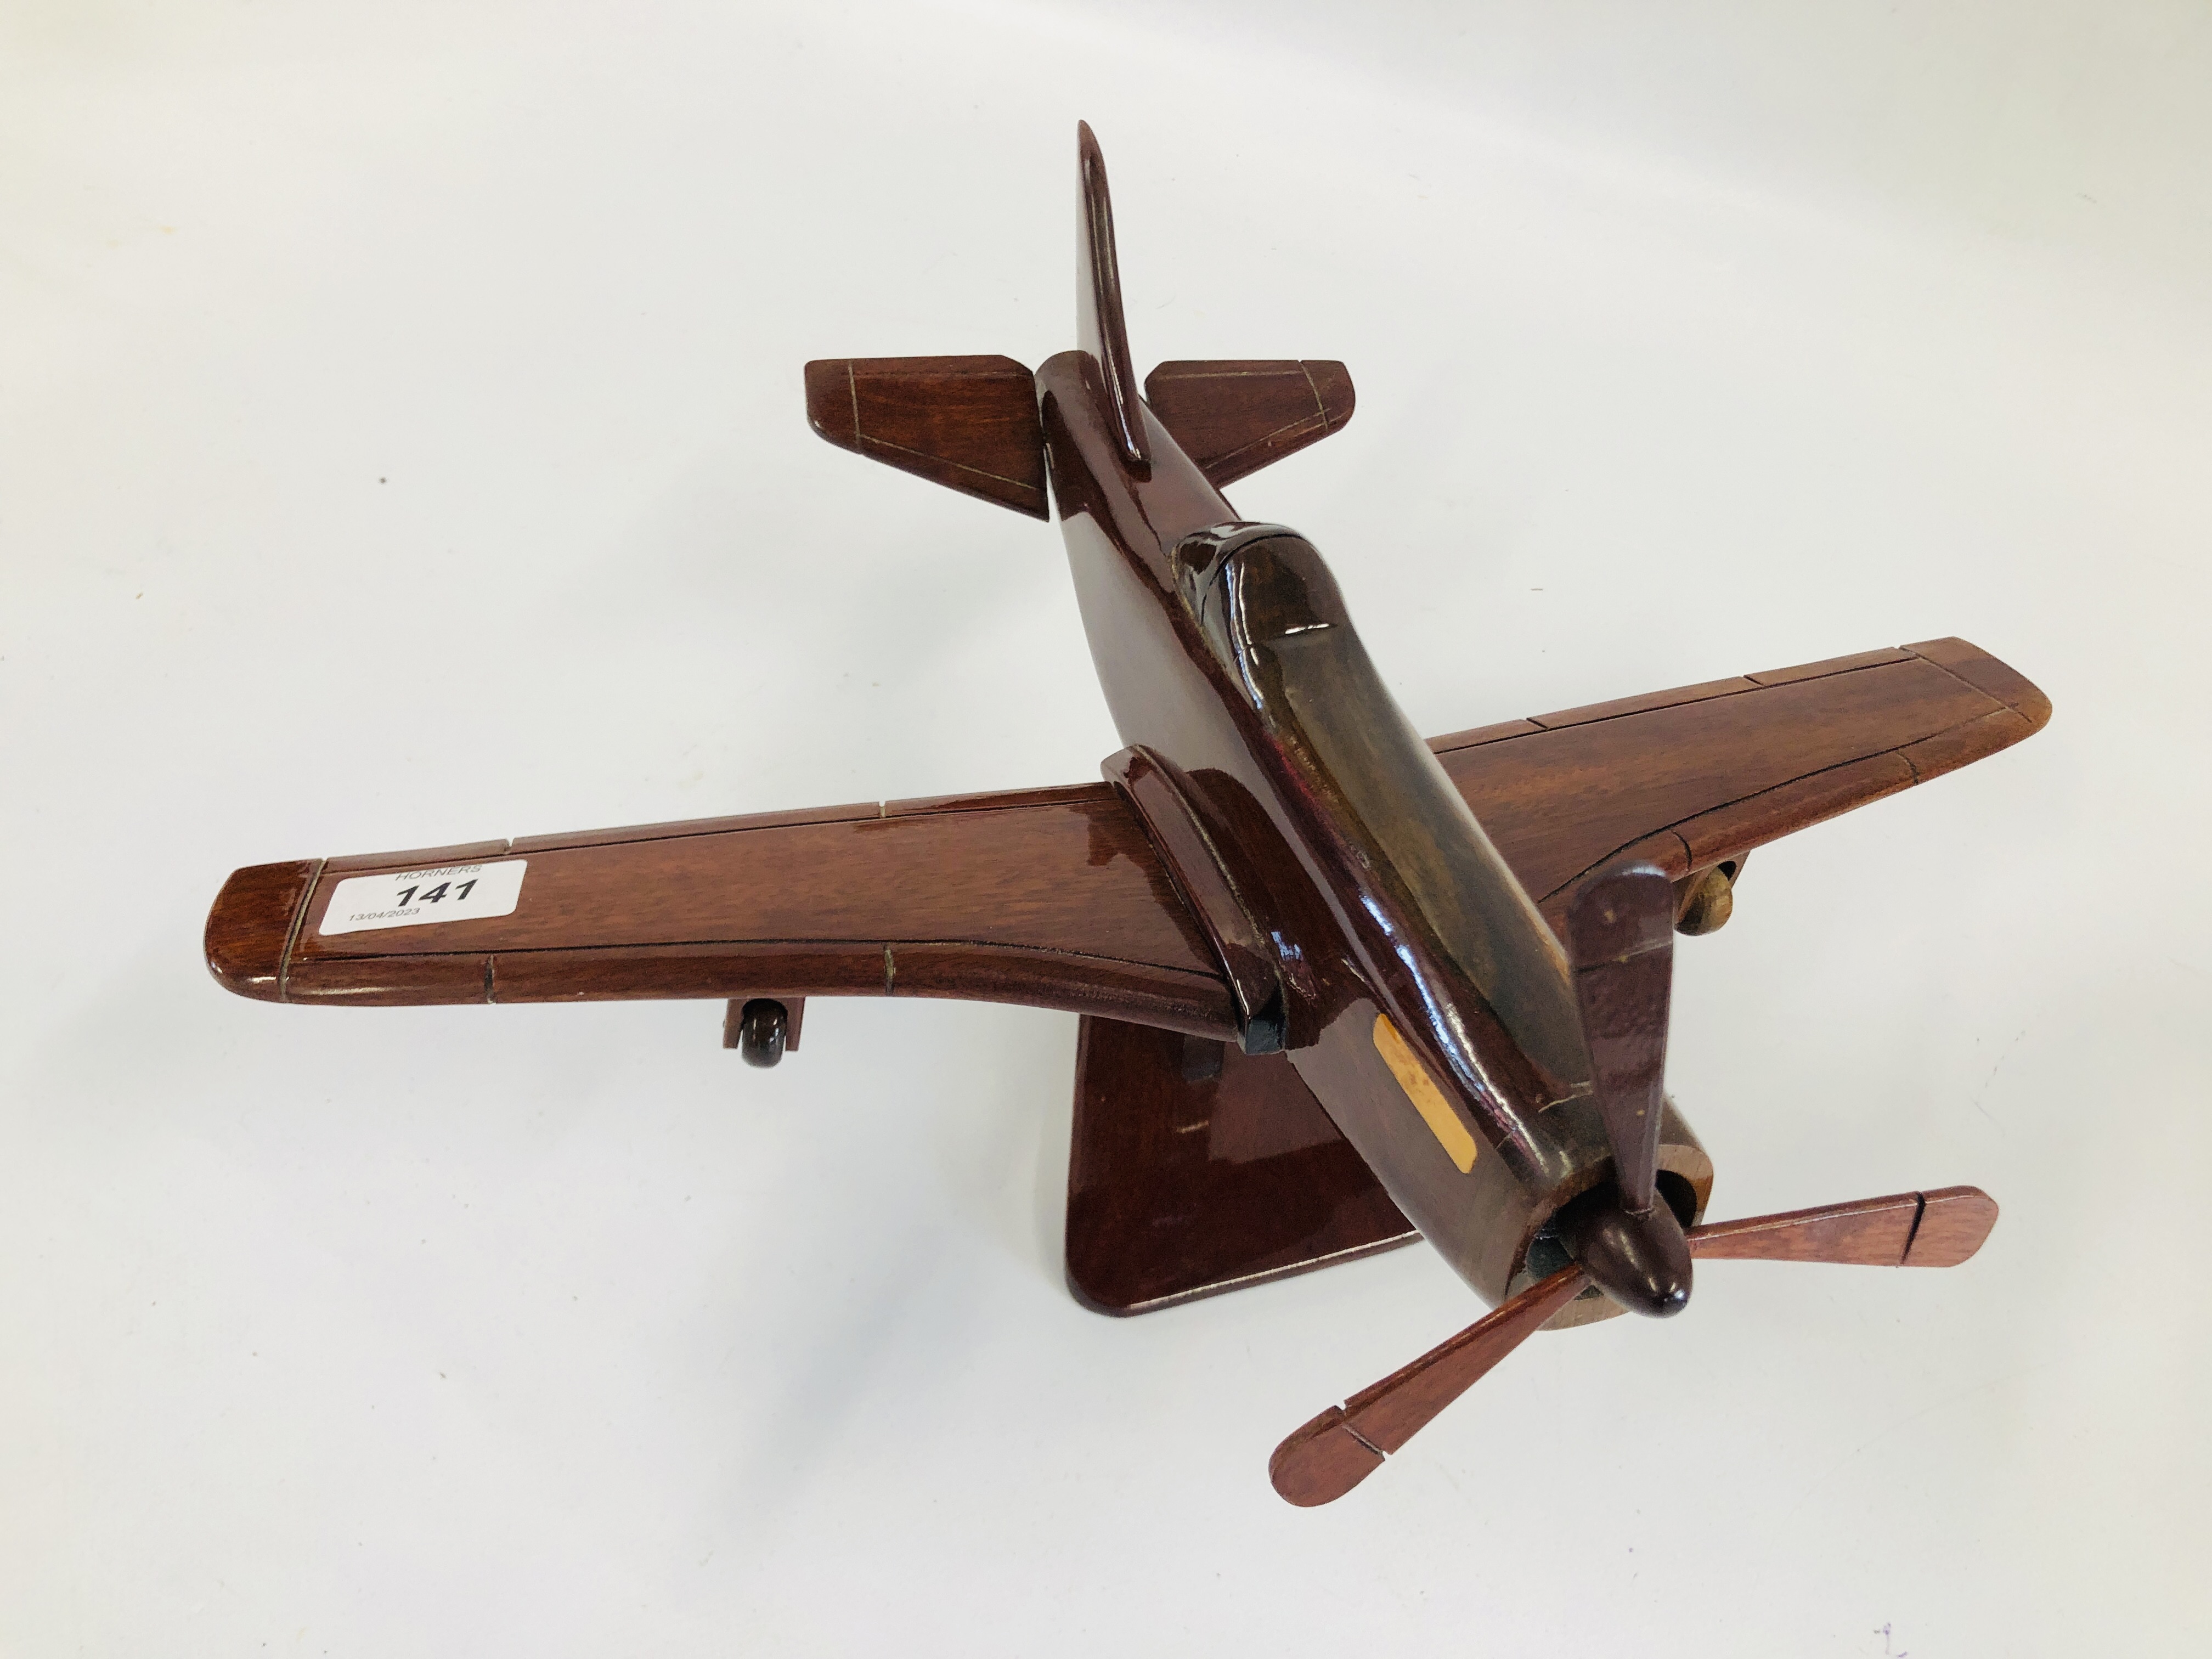 A HAND CRAFTED WOODEN SPITFIRE MODEL. - Image 2 of 4